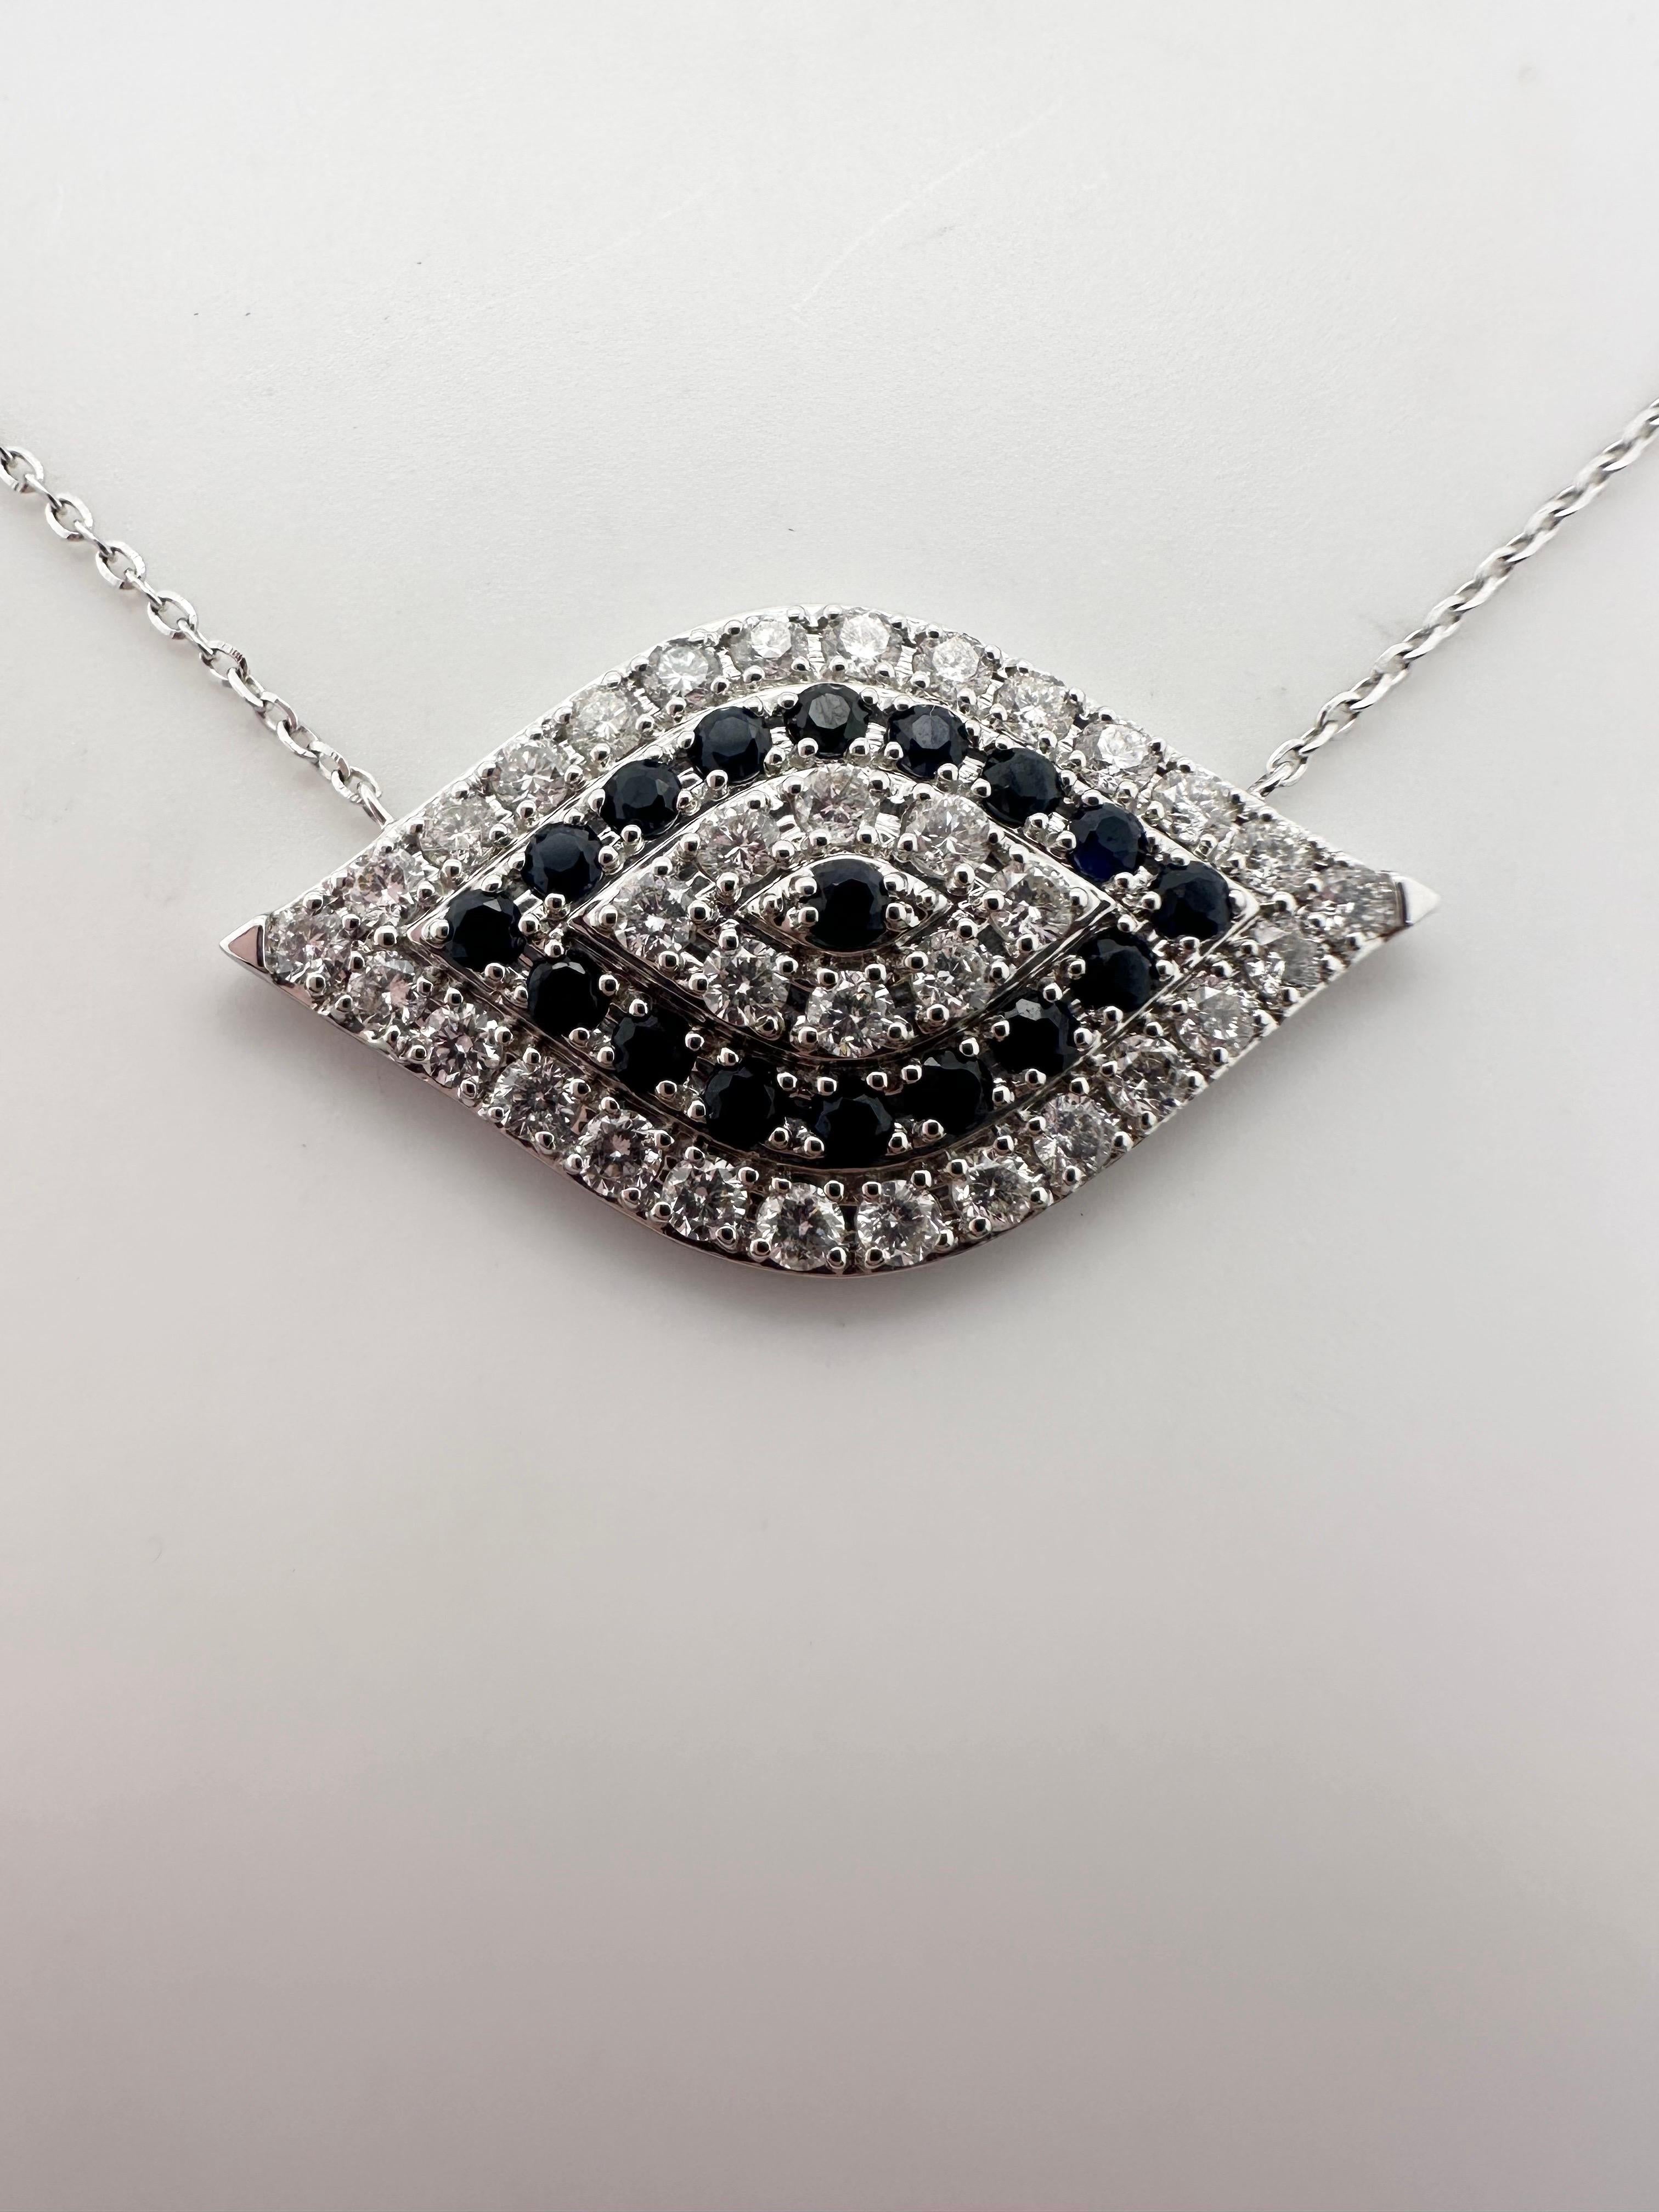 Modern pendant necklace made in evil eye design with natural sapphires and diamonds in 14Kt white gold, certificate of authenticity comes with the purchase! Chain is 18